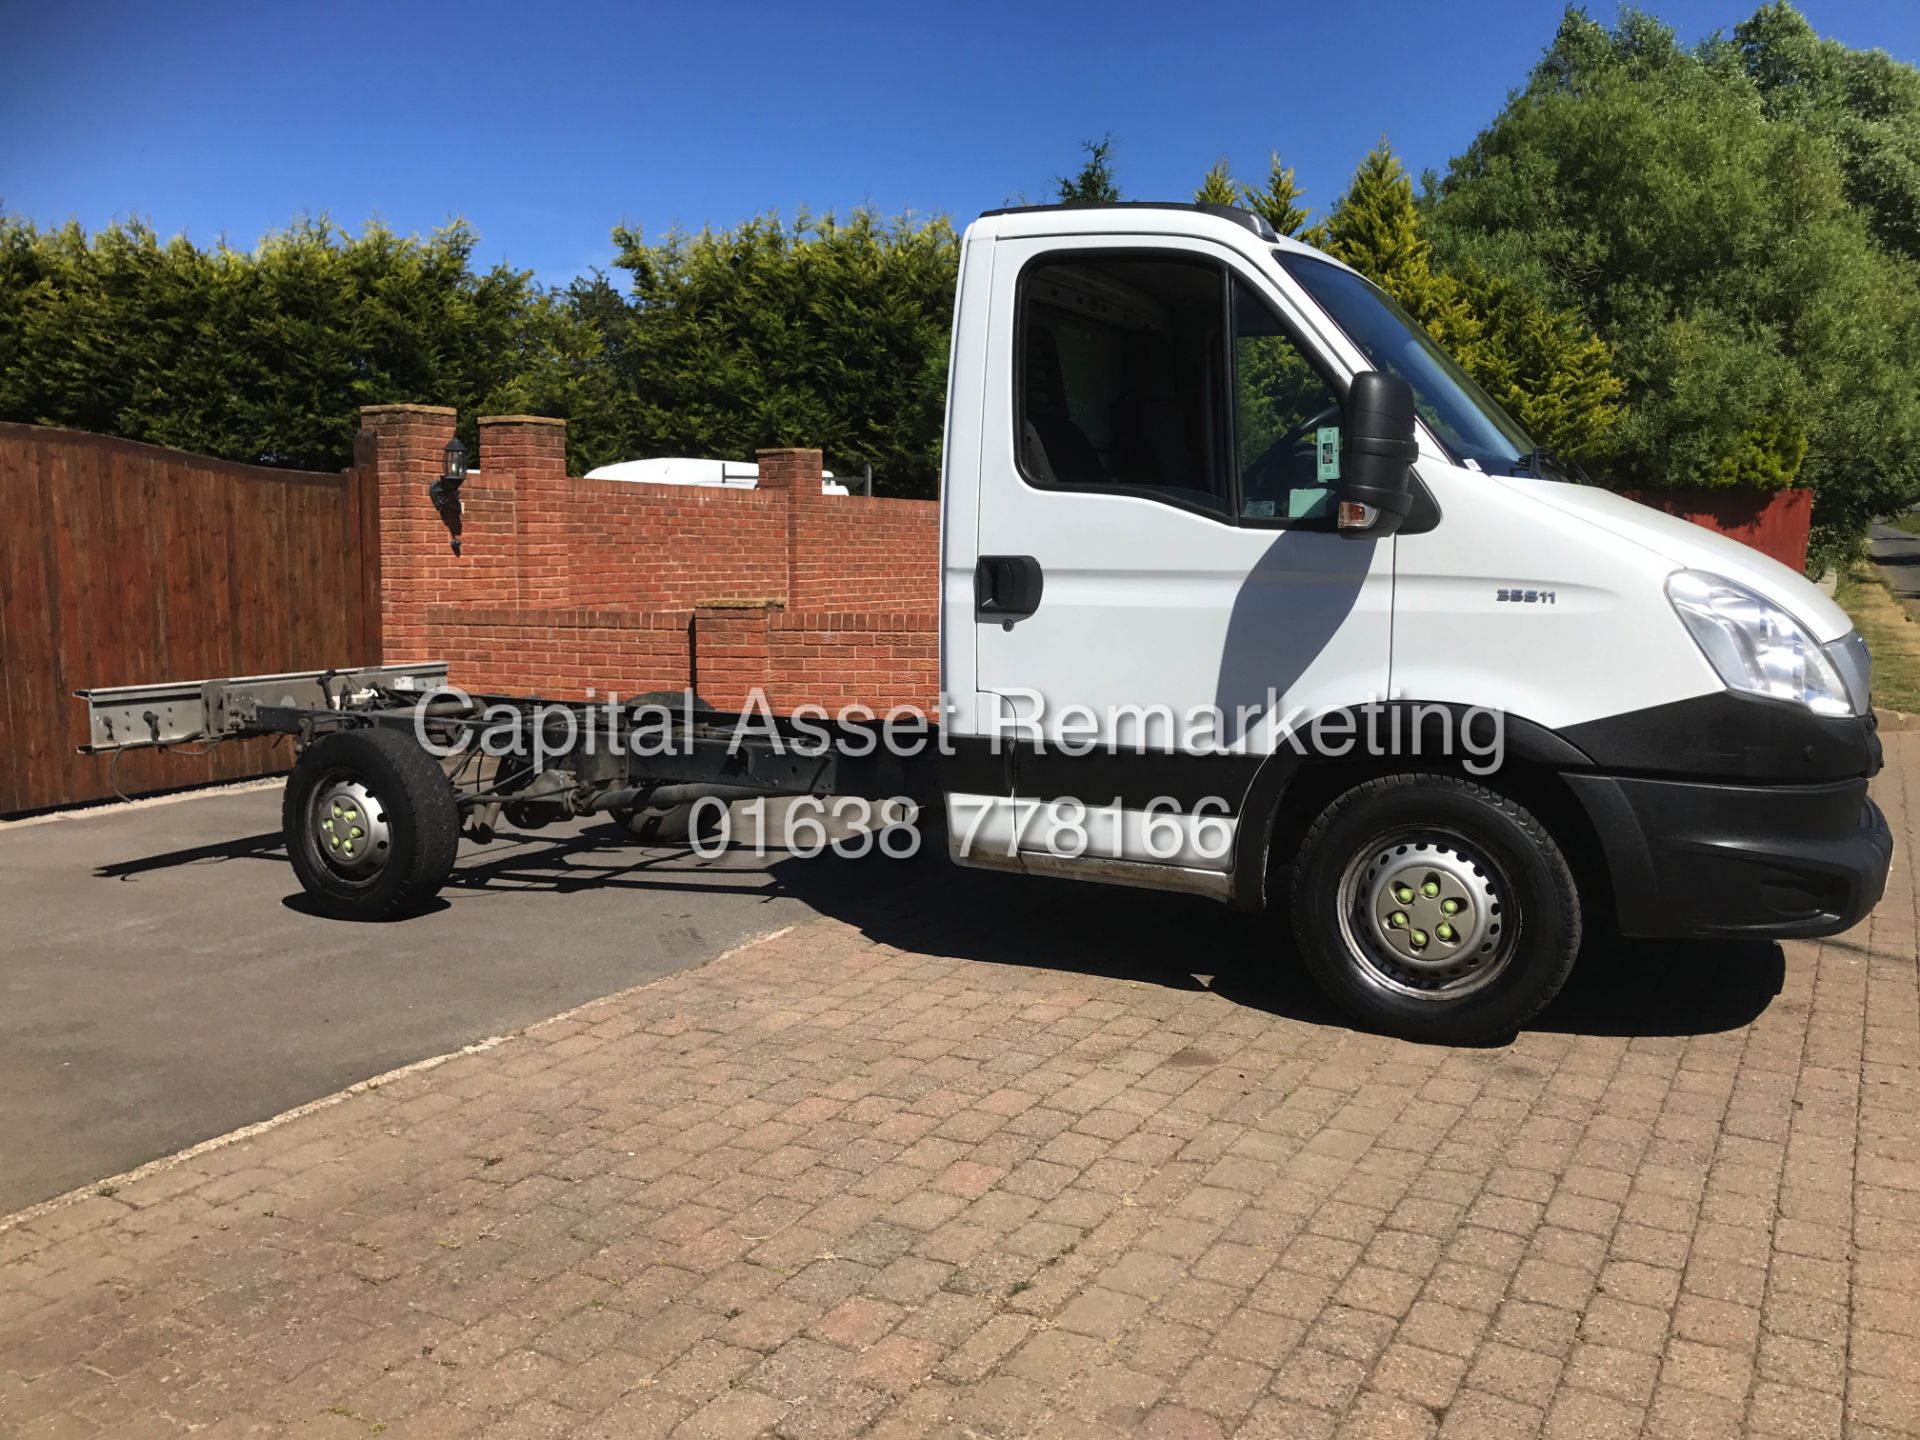 IVECO DAILY 35S11 (14 REG) LONG WHEEL BASE - 1 OWNER - IDEAL RECOVERY CONVERSION